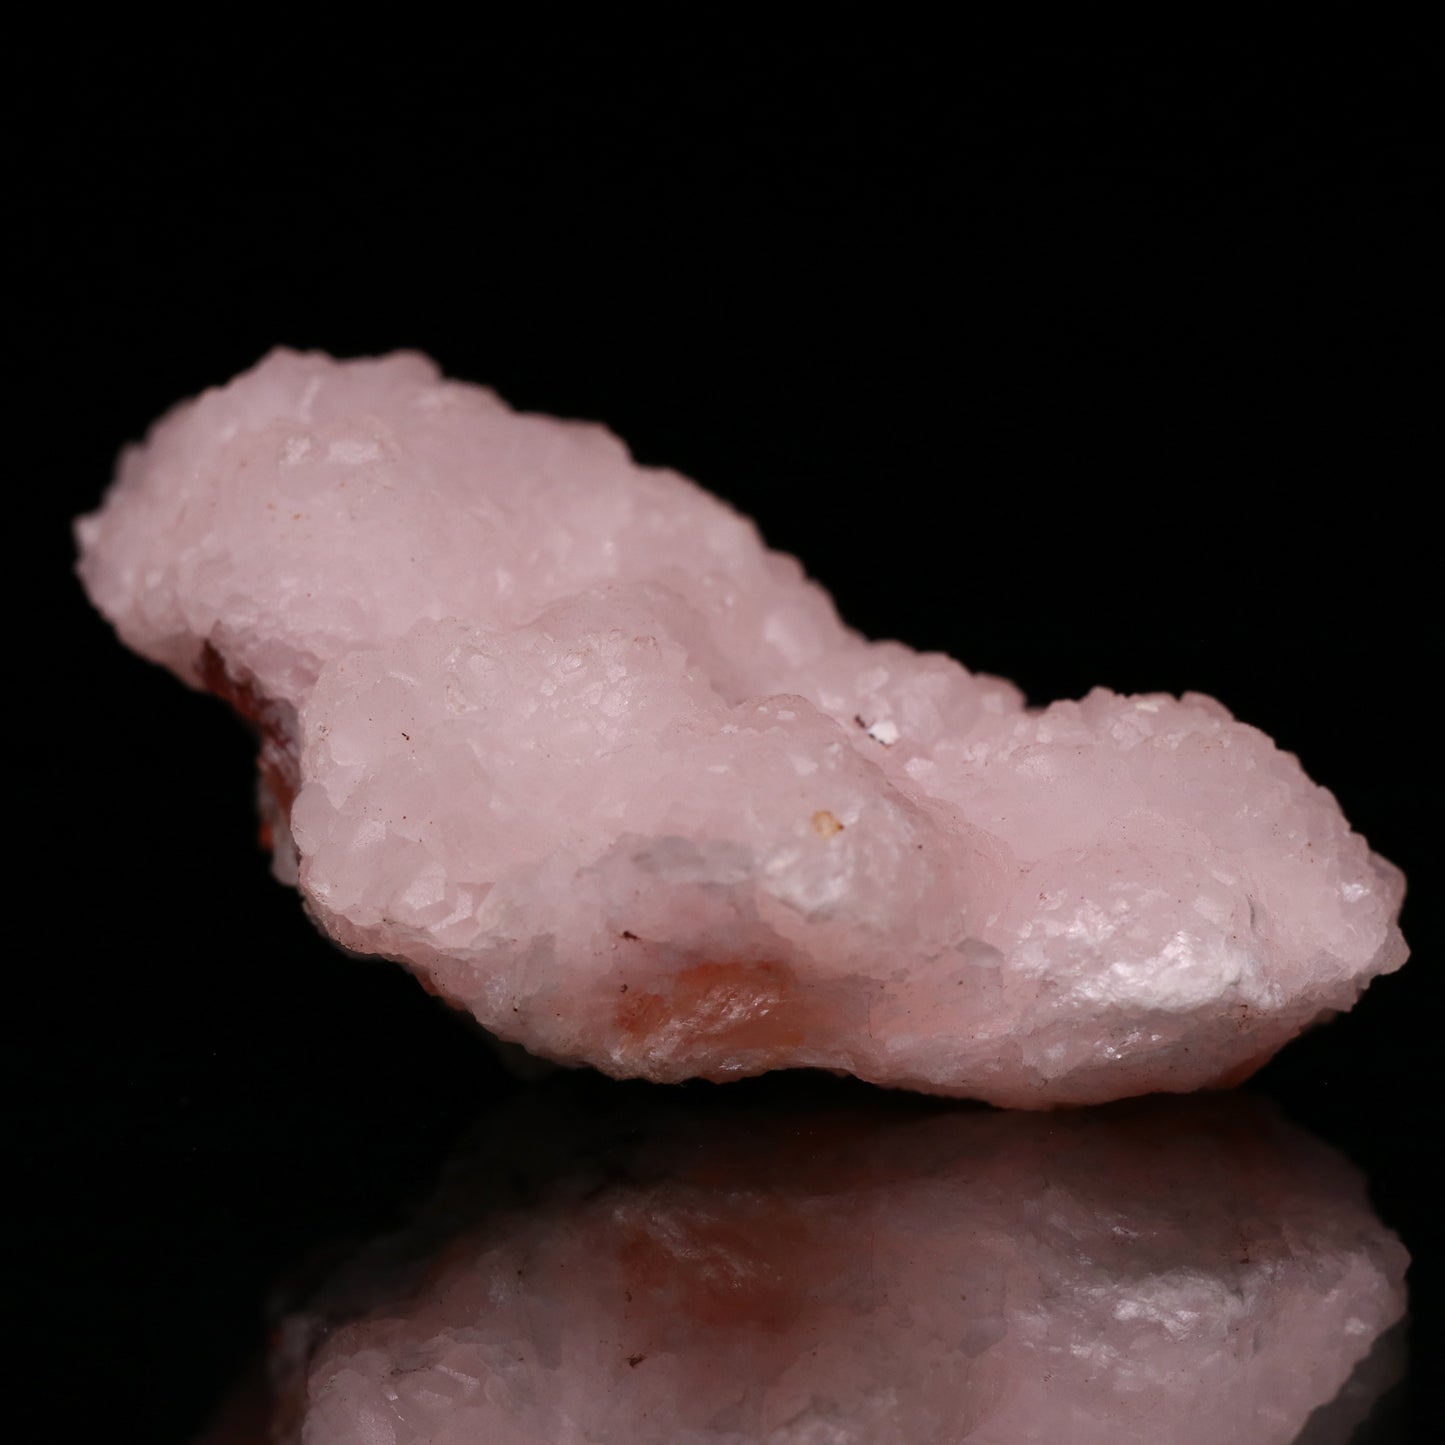 Datolite on Calcite (Fluorescent), Wessels Mine, Kalahari Manganese Field, Northern Cape, South Africa